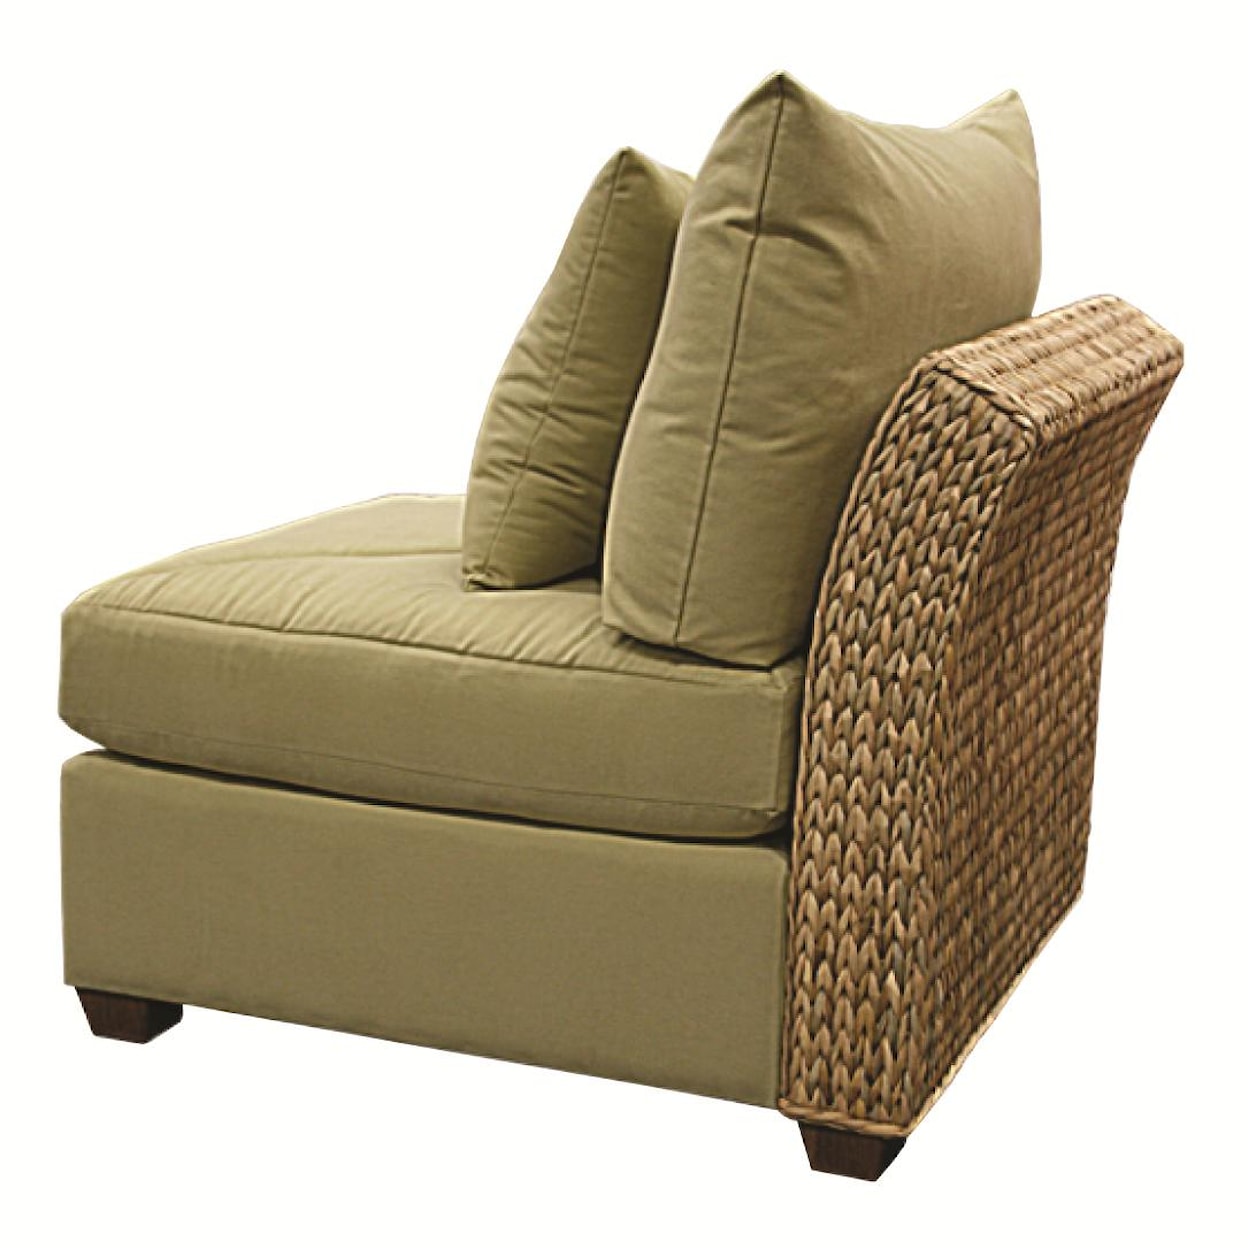 Capris Furniture Chairs and Ottomans Armless Chair